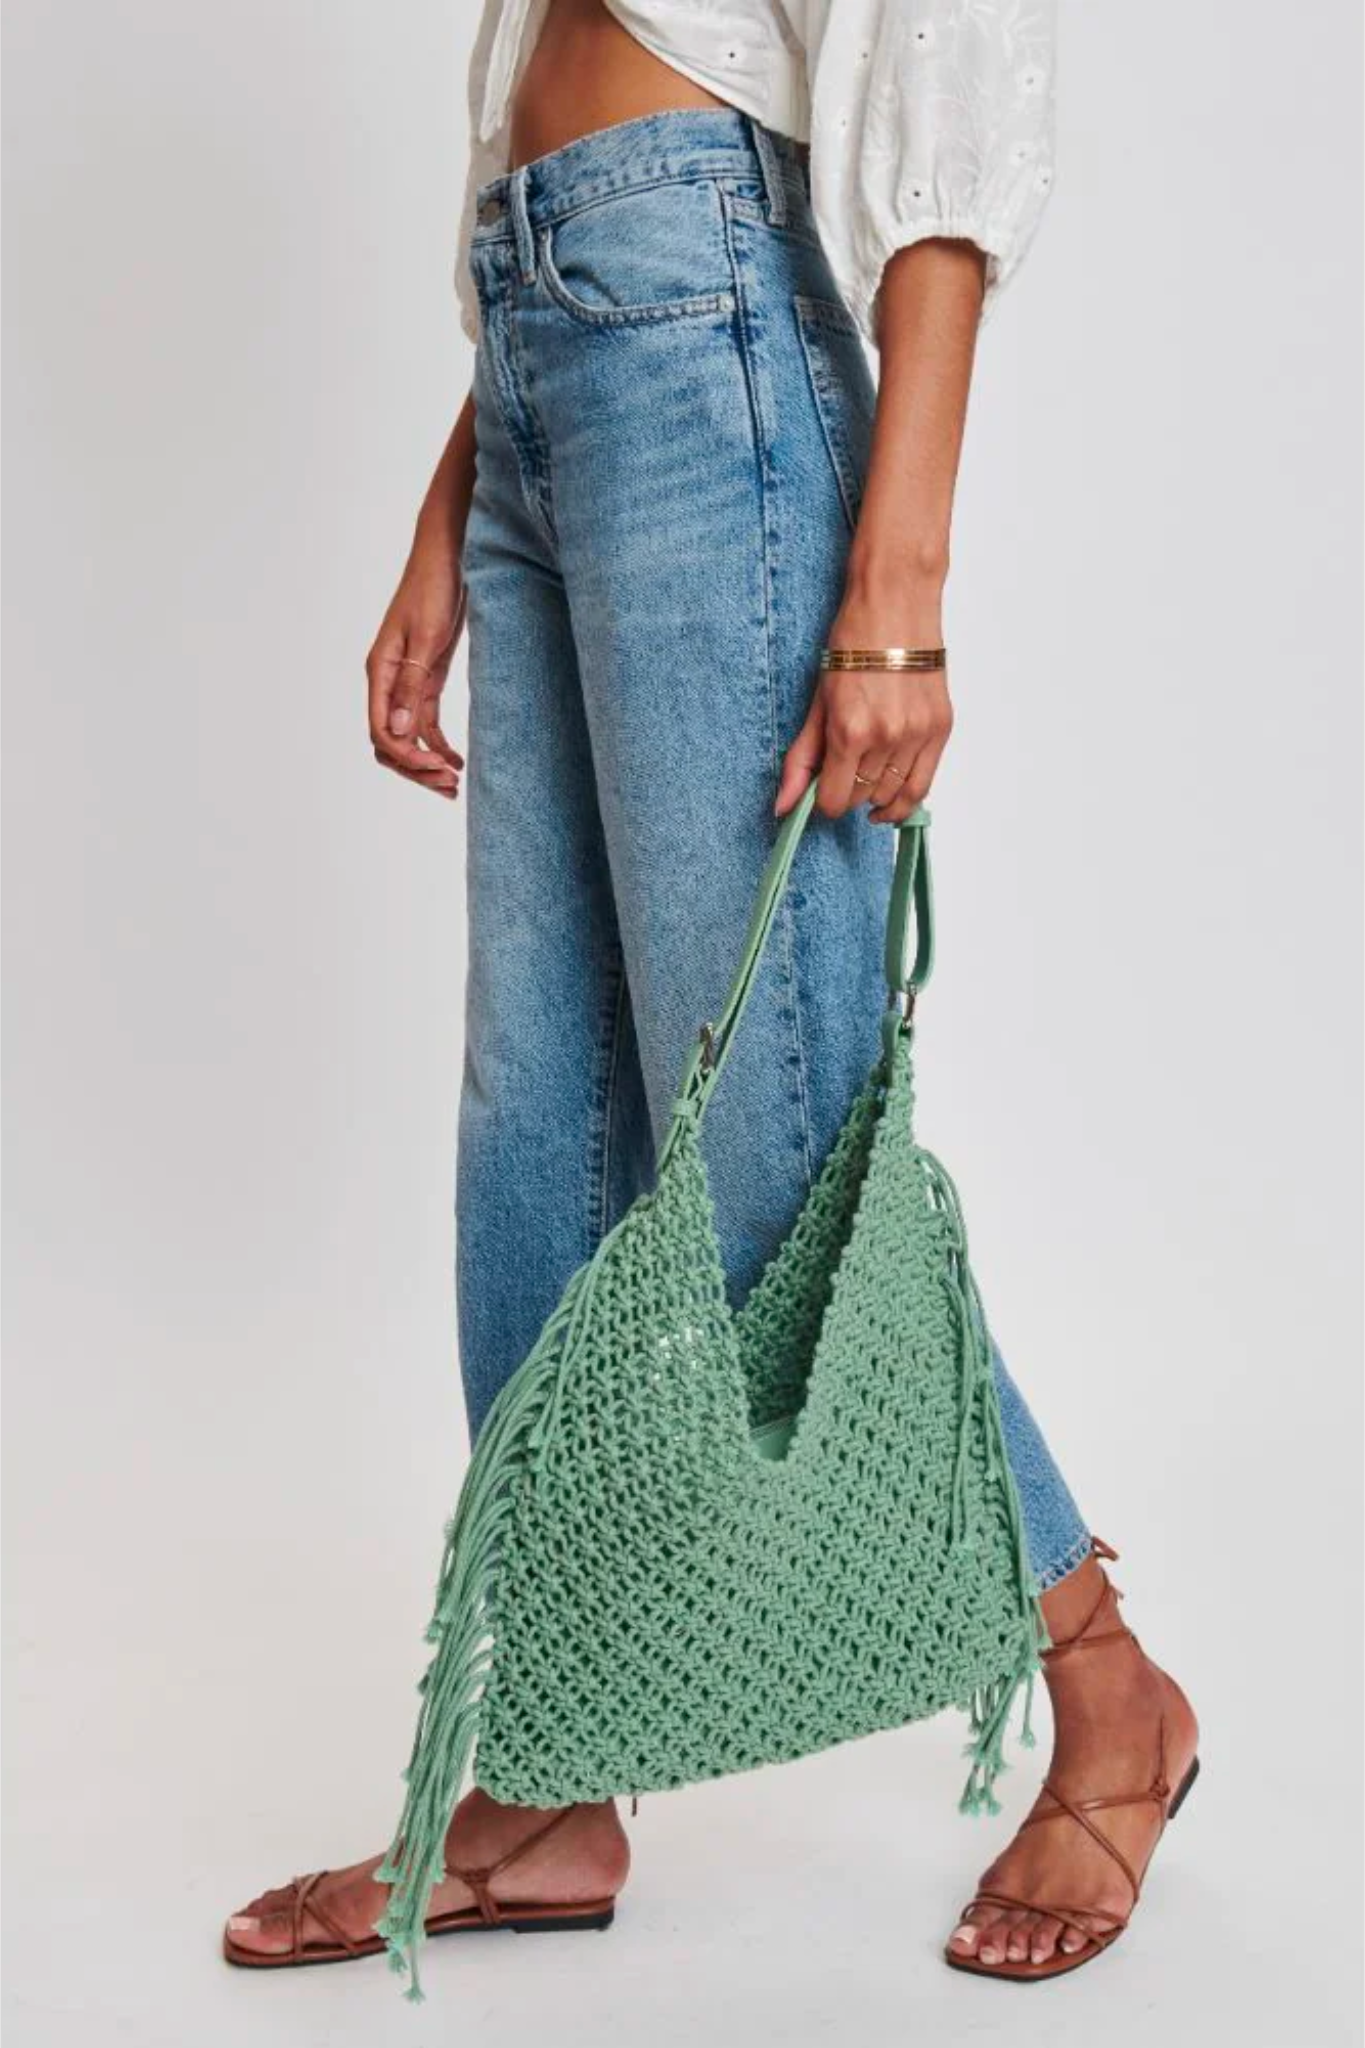 View 5 of Ariel Crochet Hobo Bag in Sage, a Bags from Larrea Cove. Detail: .